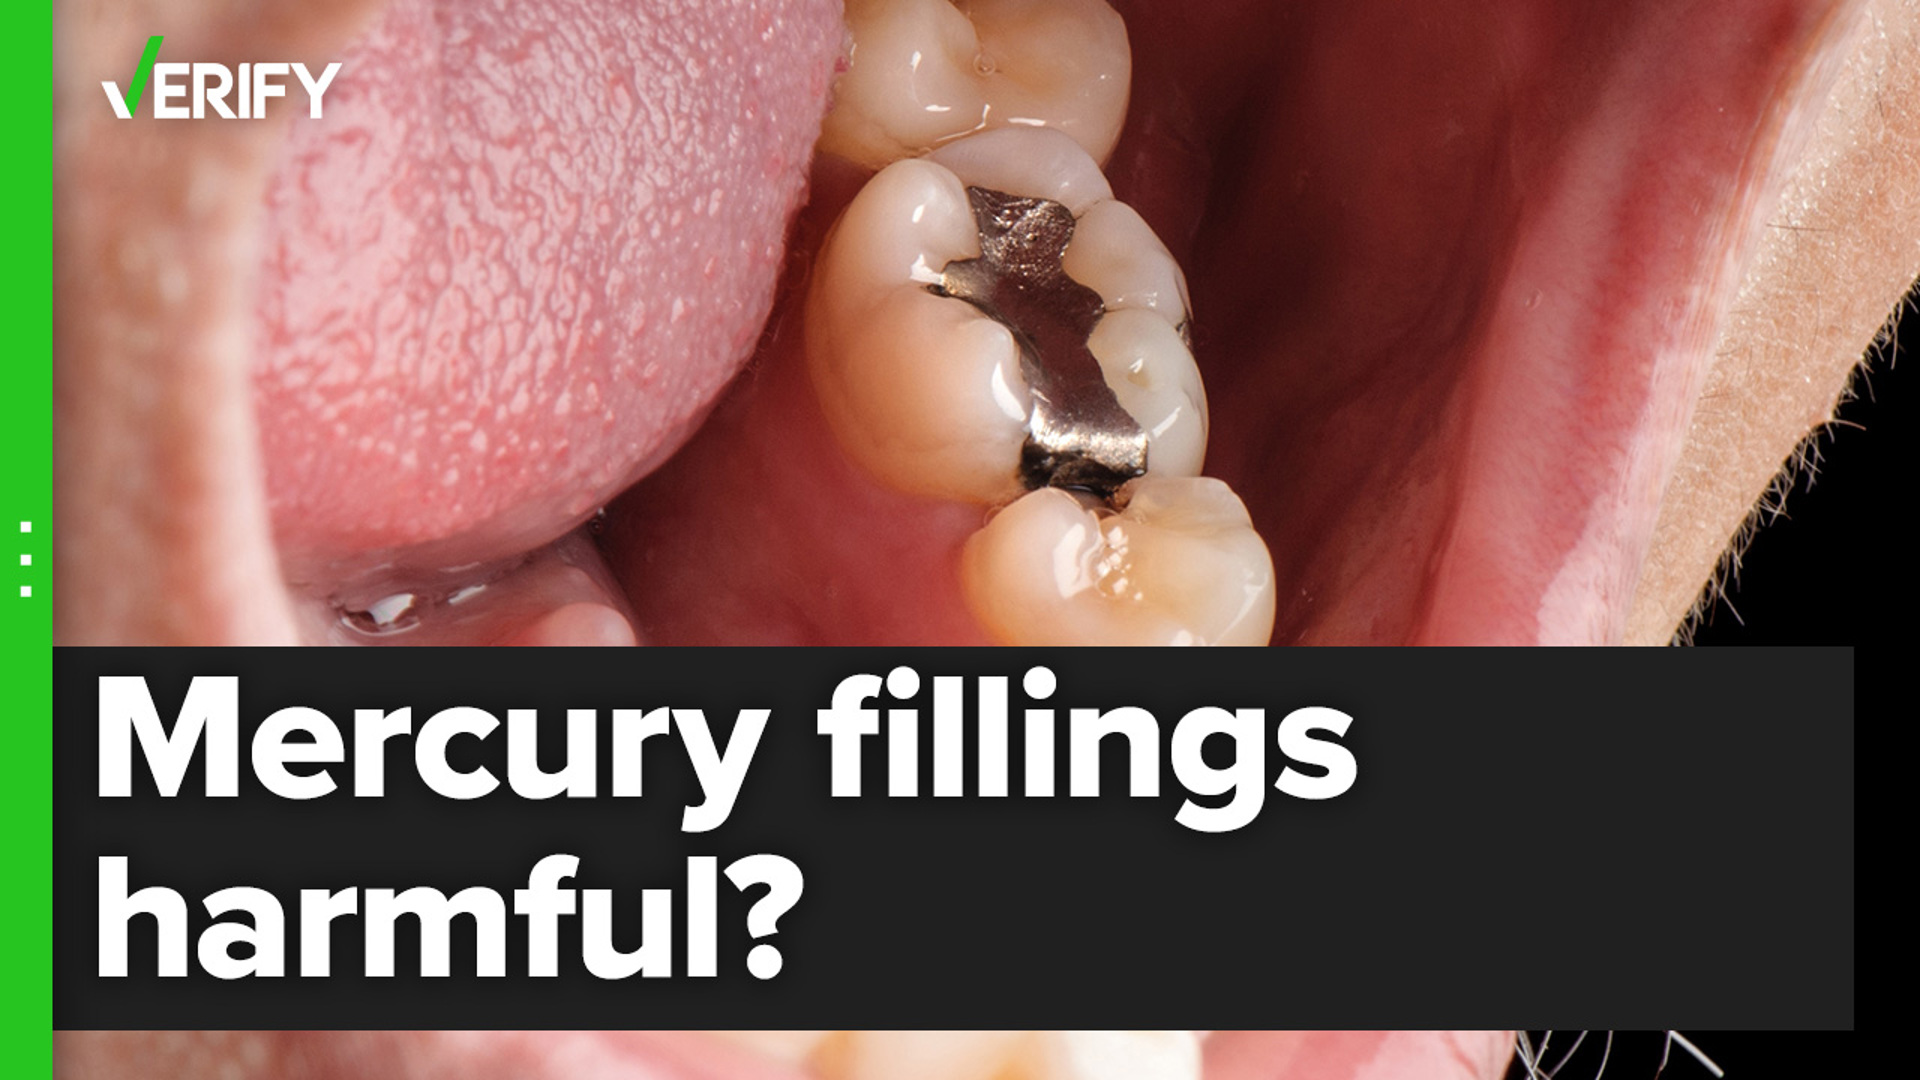 Dental amalgam is considered a safe cavity-filling material for most adults and children over the age of 6. But certain people should avoid getting fillings with it.